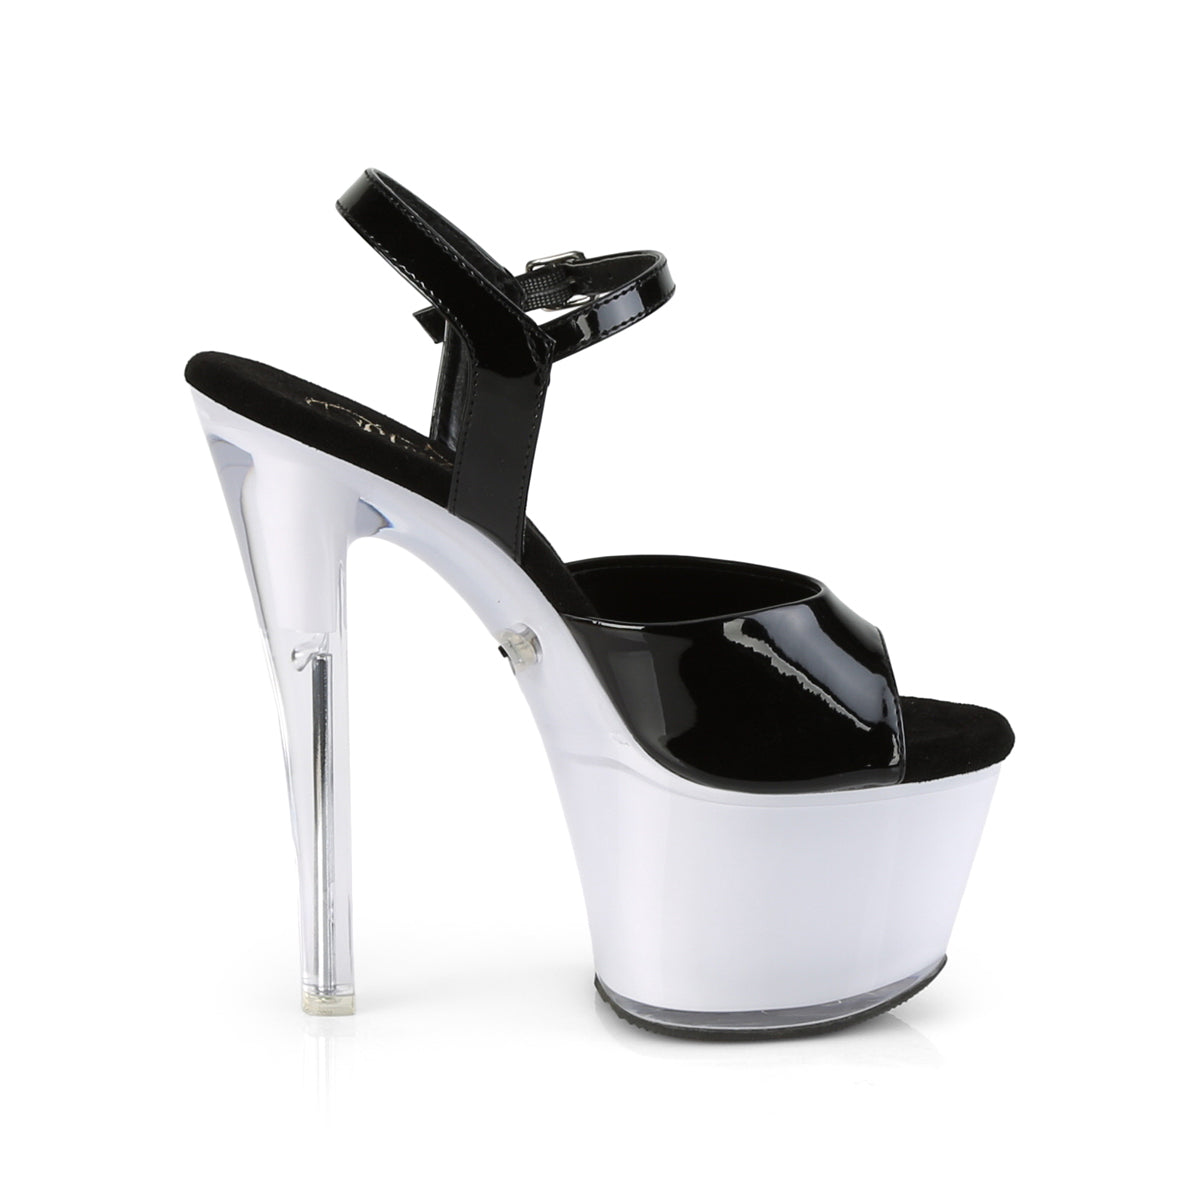 New Light Up Electronic LED Controlled Platform Heels | SEXYSHOES.com –  SEXYSHOES.COM